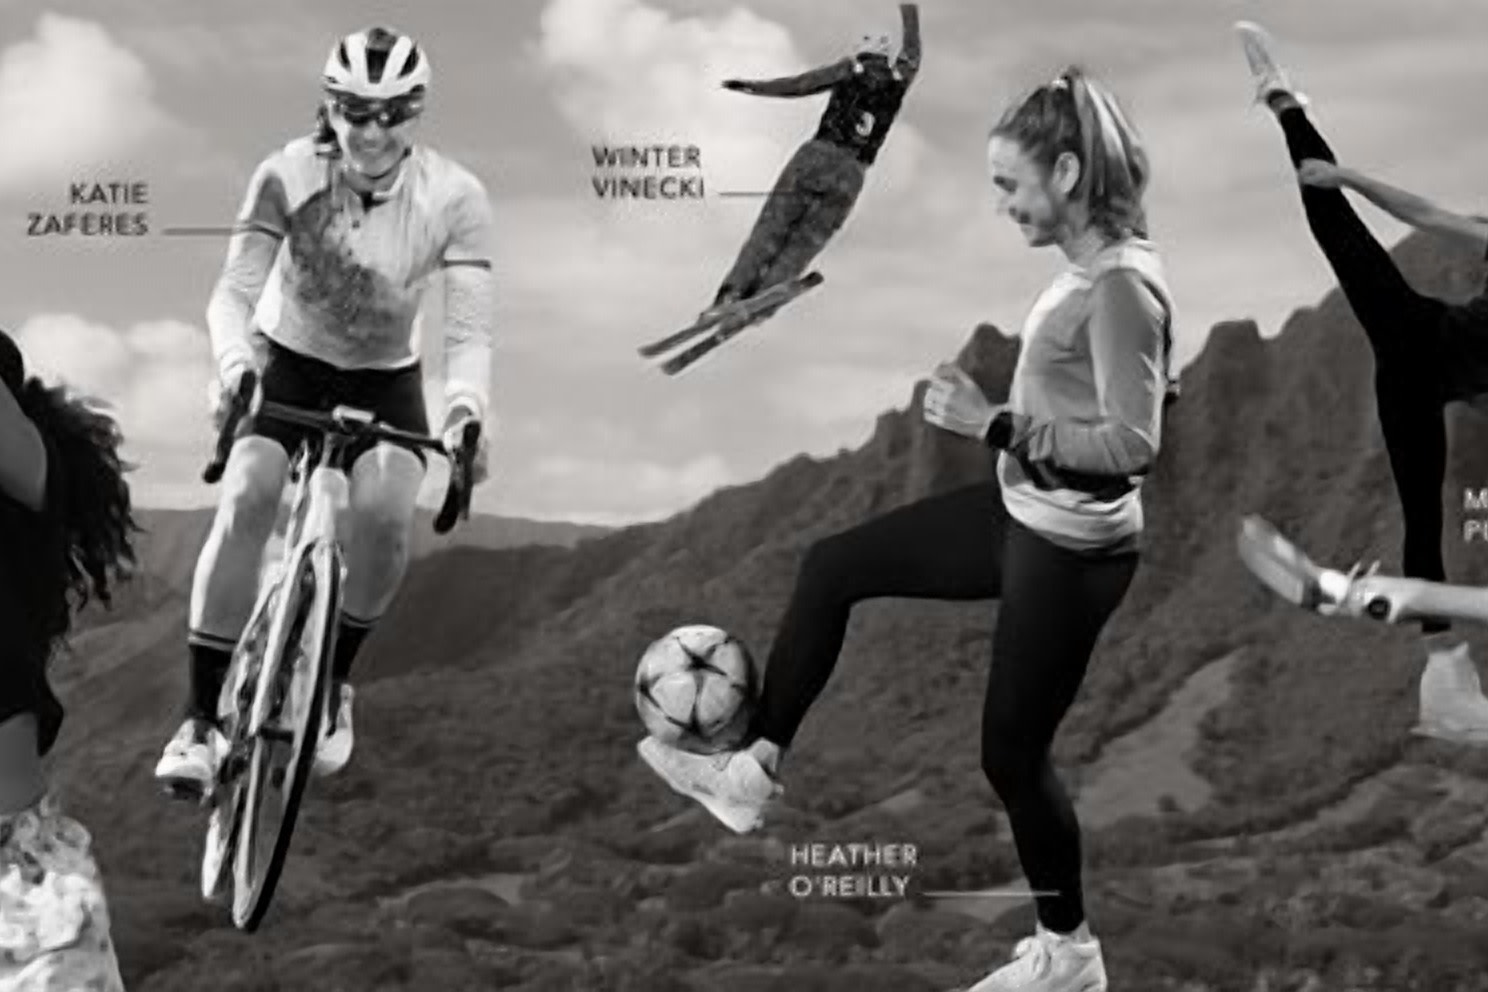 Athleta Along with Athletes Empowers Women and Girls